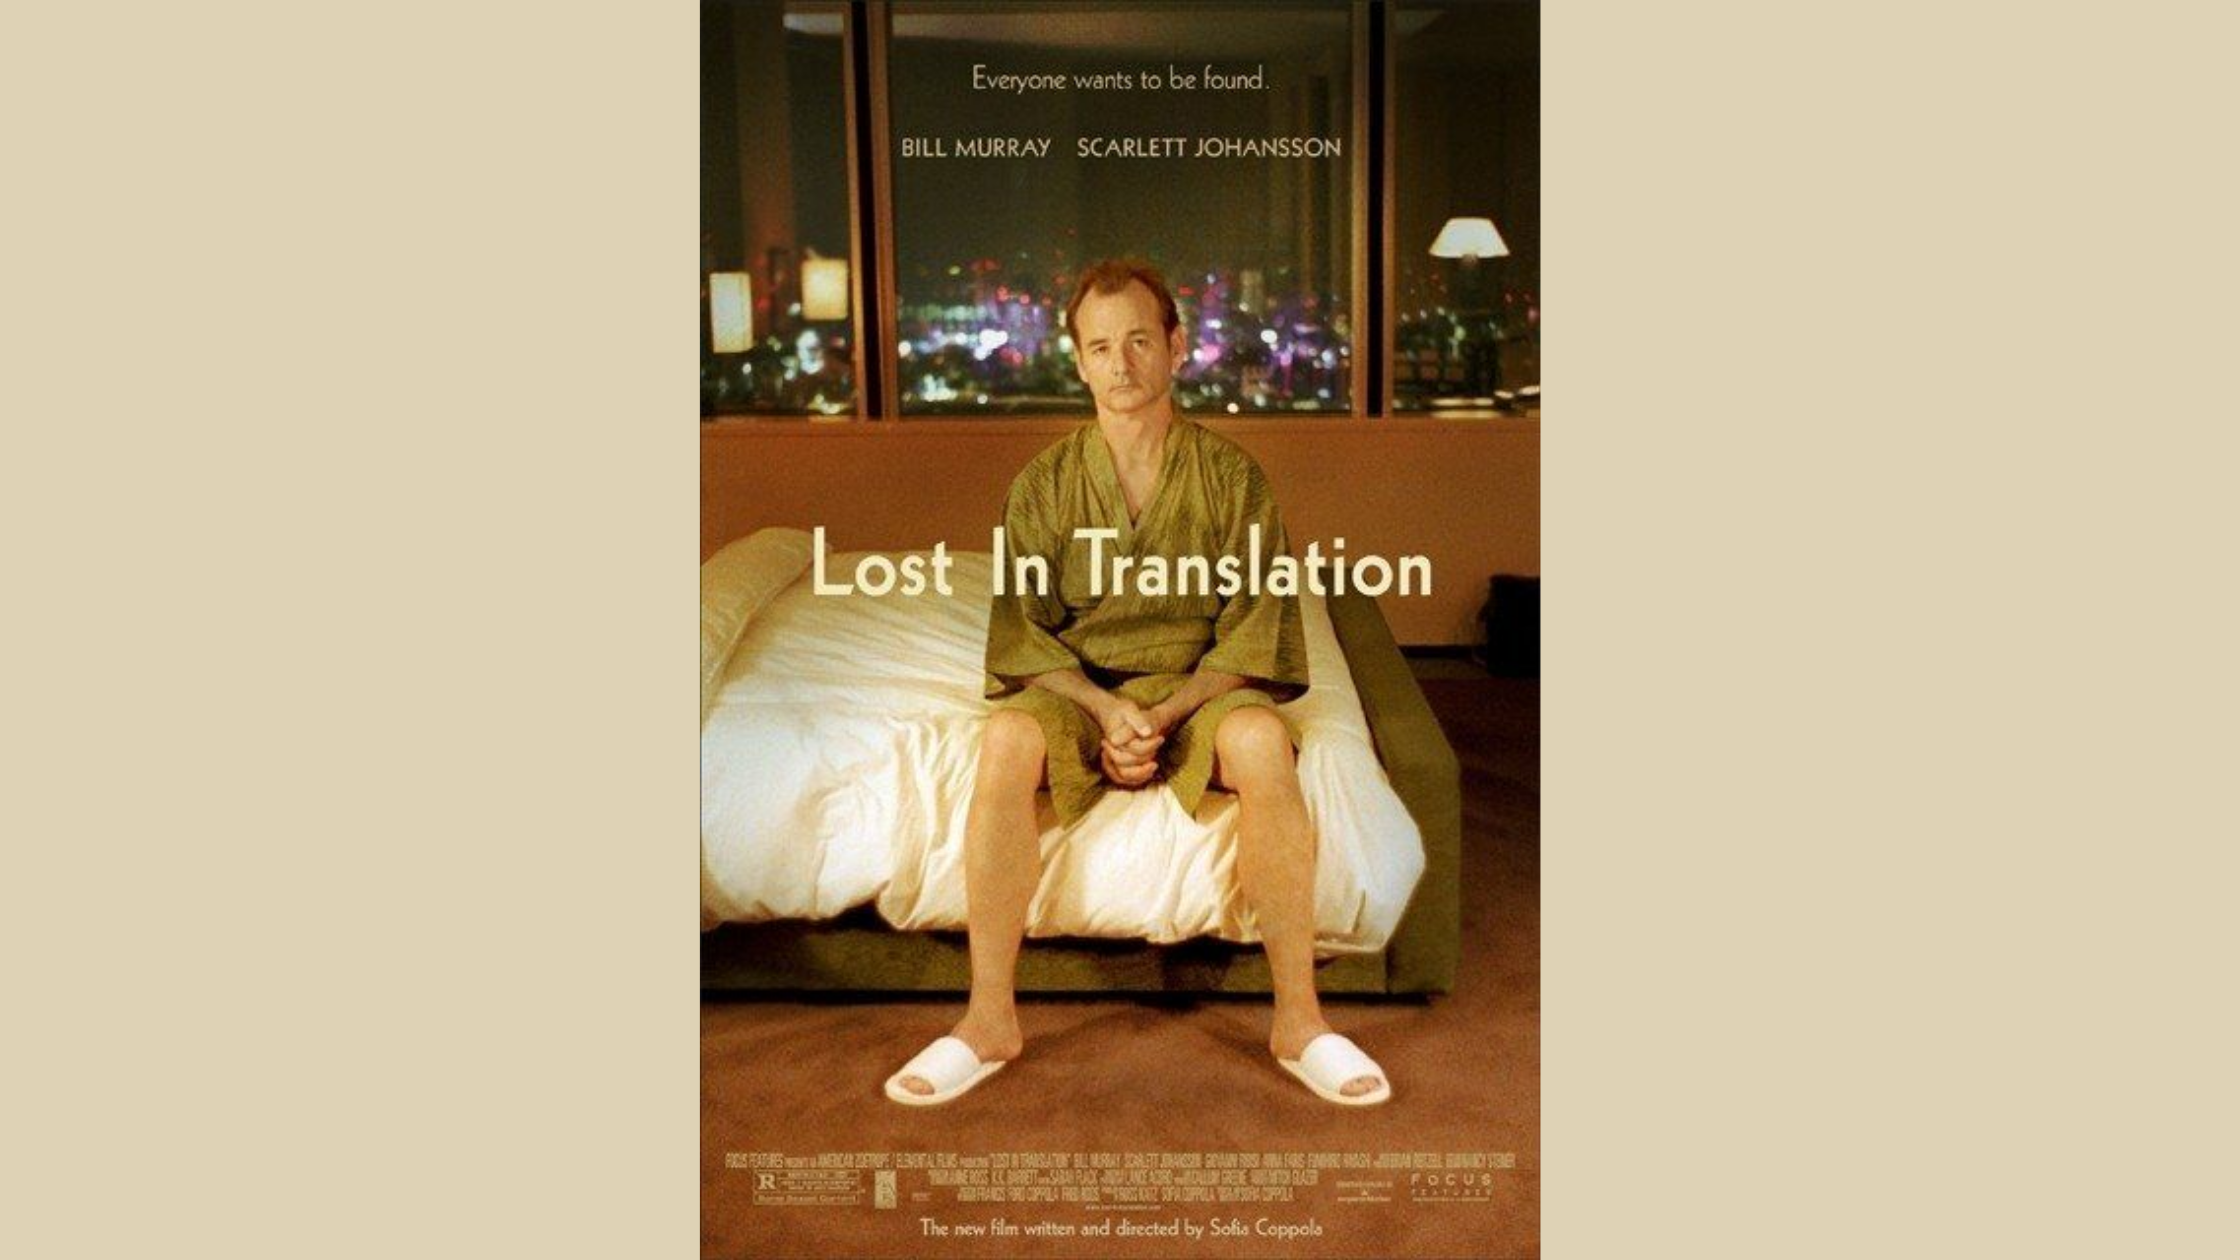 The Egregious Racism Against Asians In ‘lost In Translation The